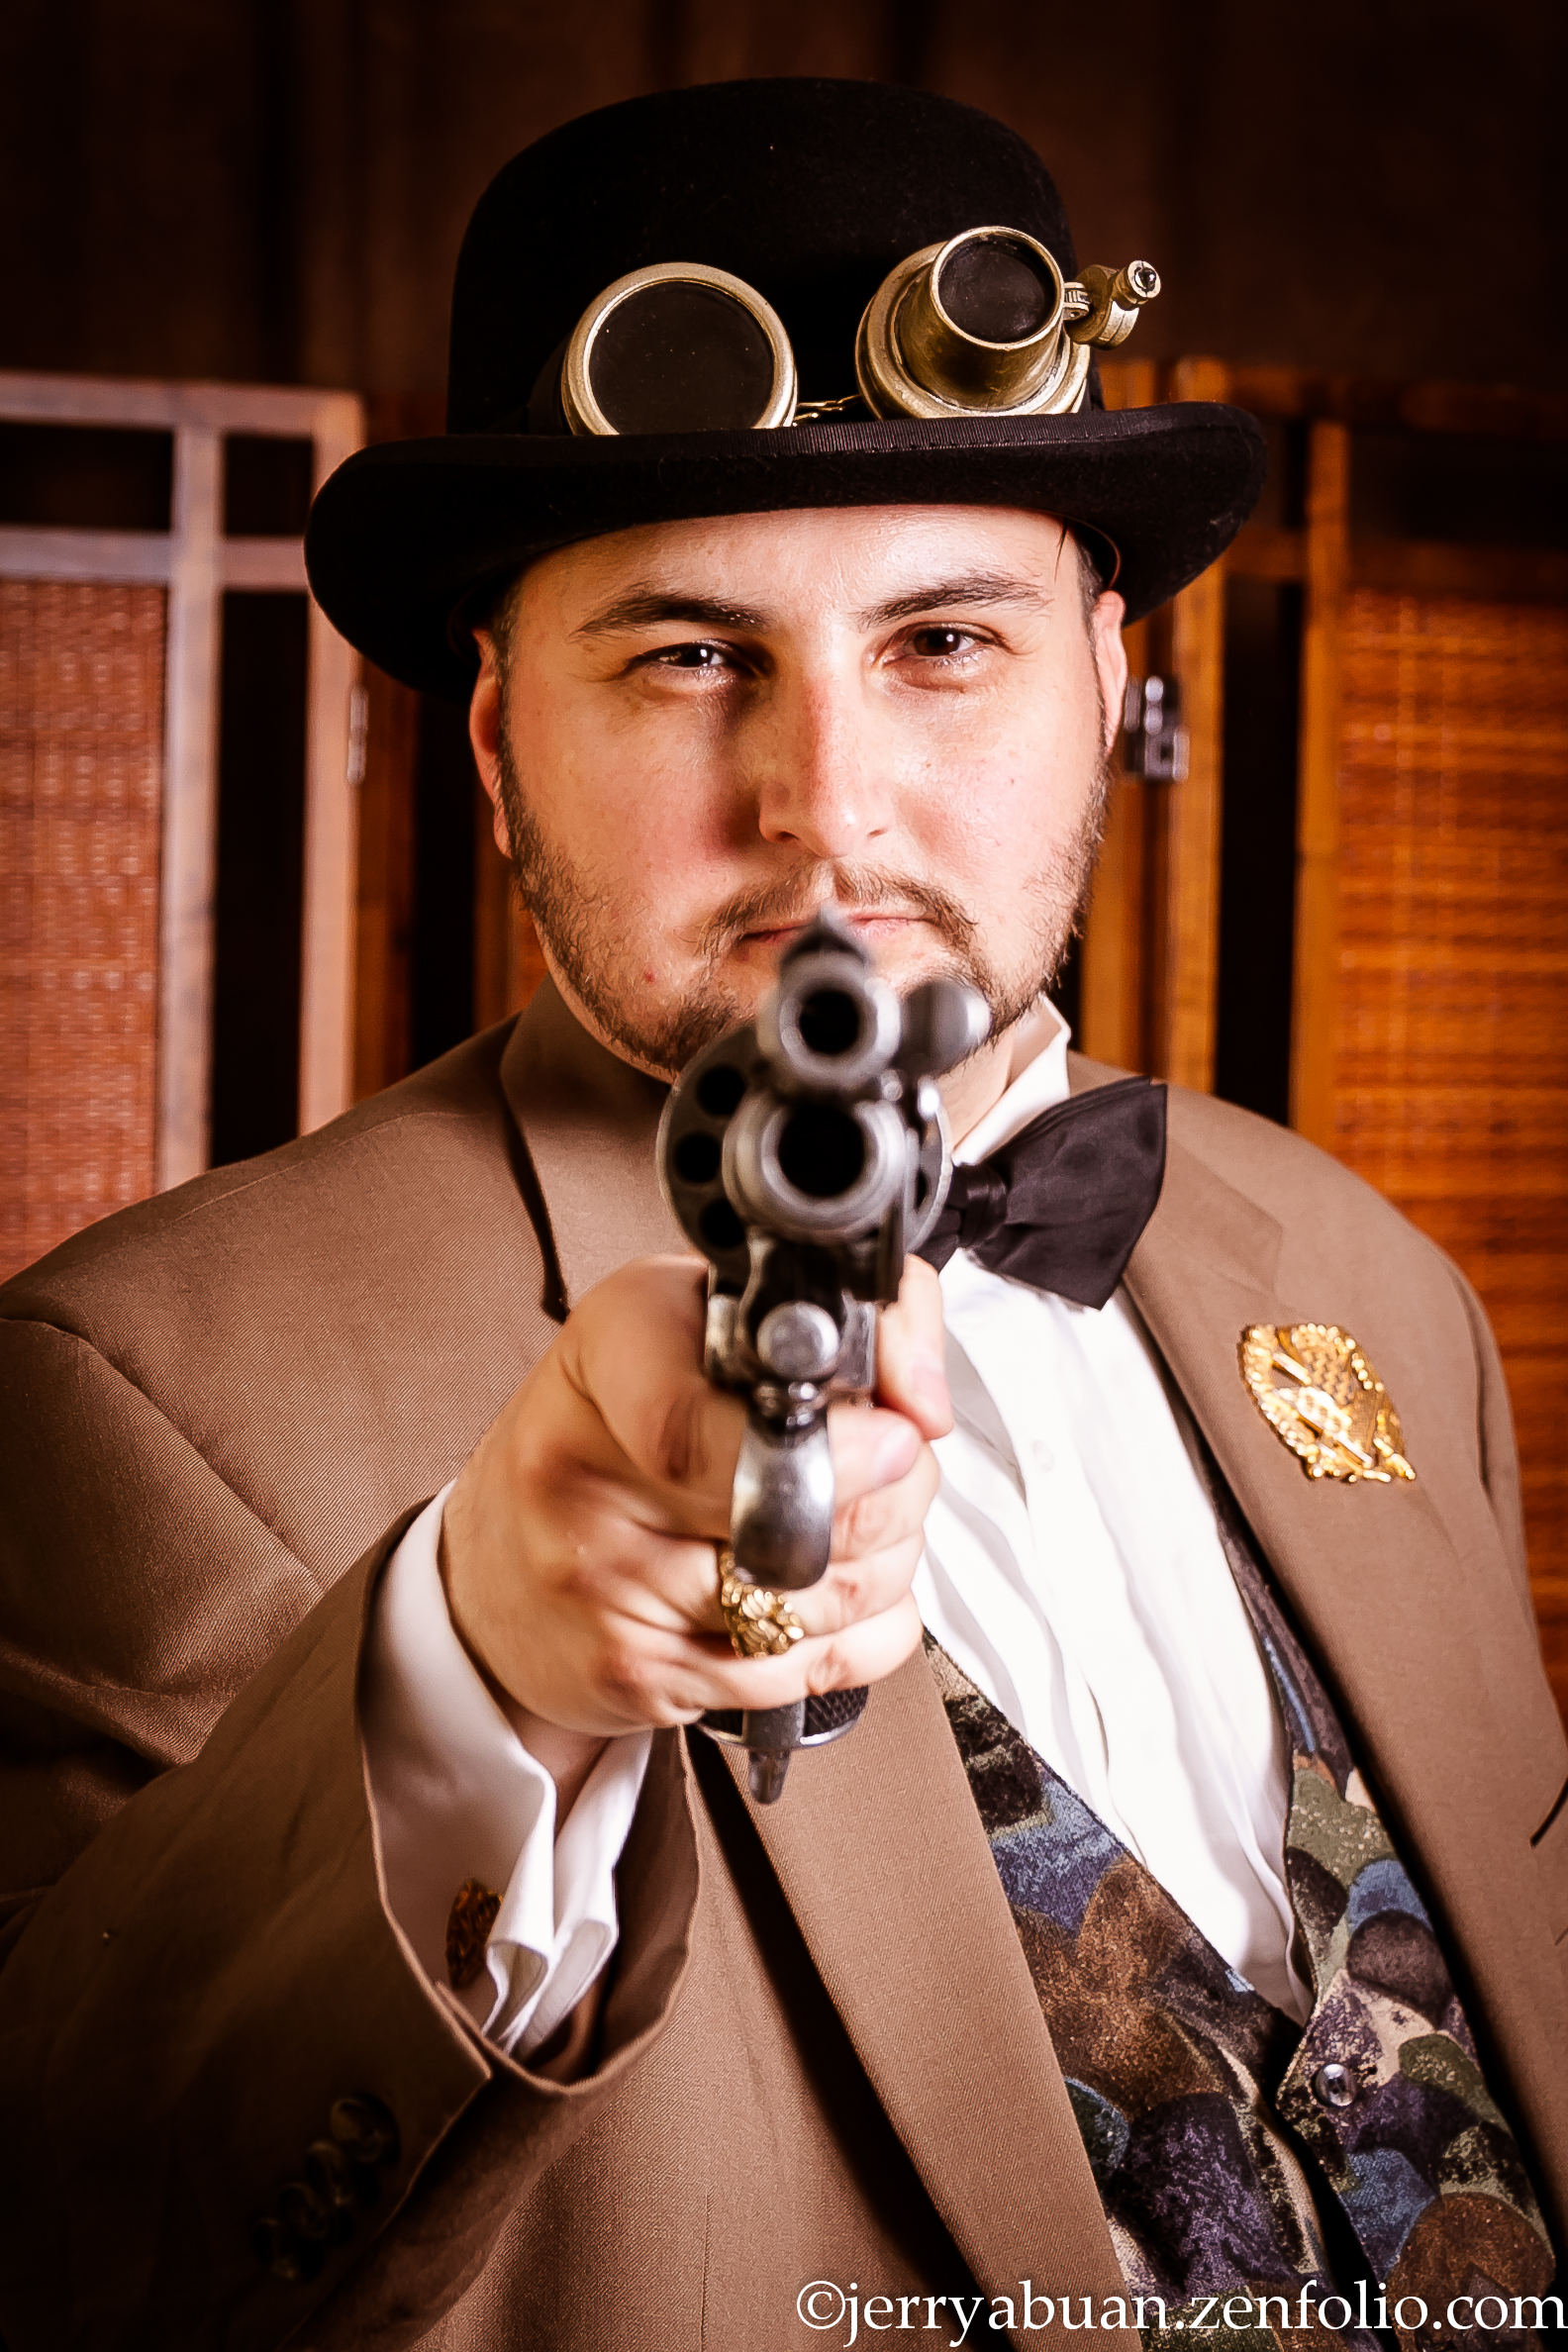 Valiant as a well-dressed outlaw at the Gaslight Gathering 2014 in Fashion Valley, CA (May 2014.